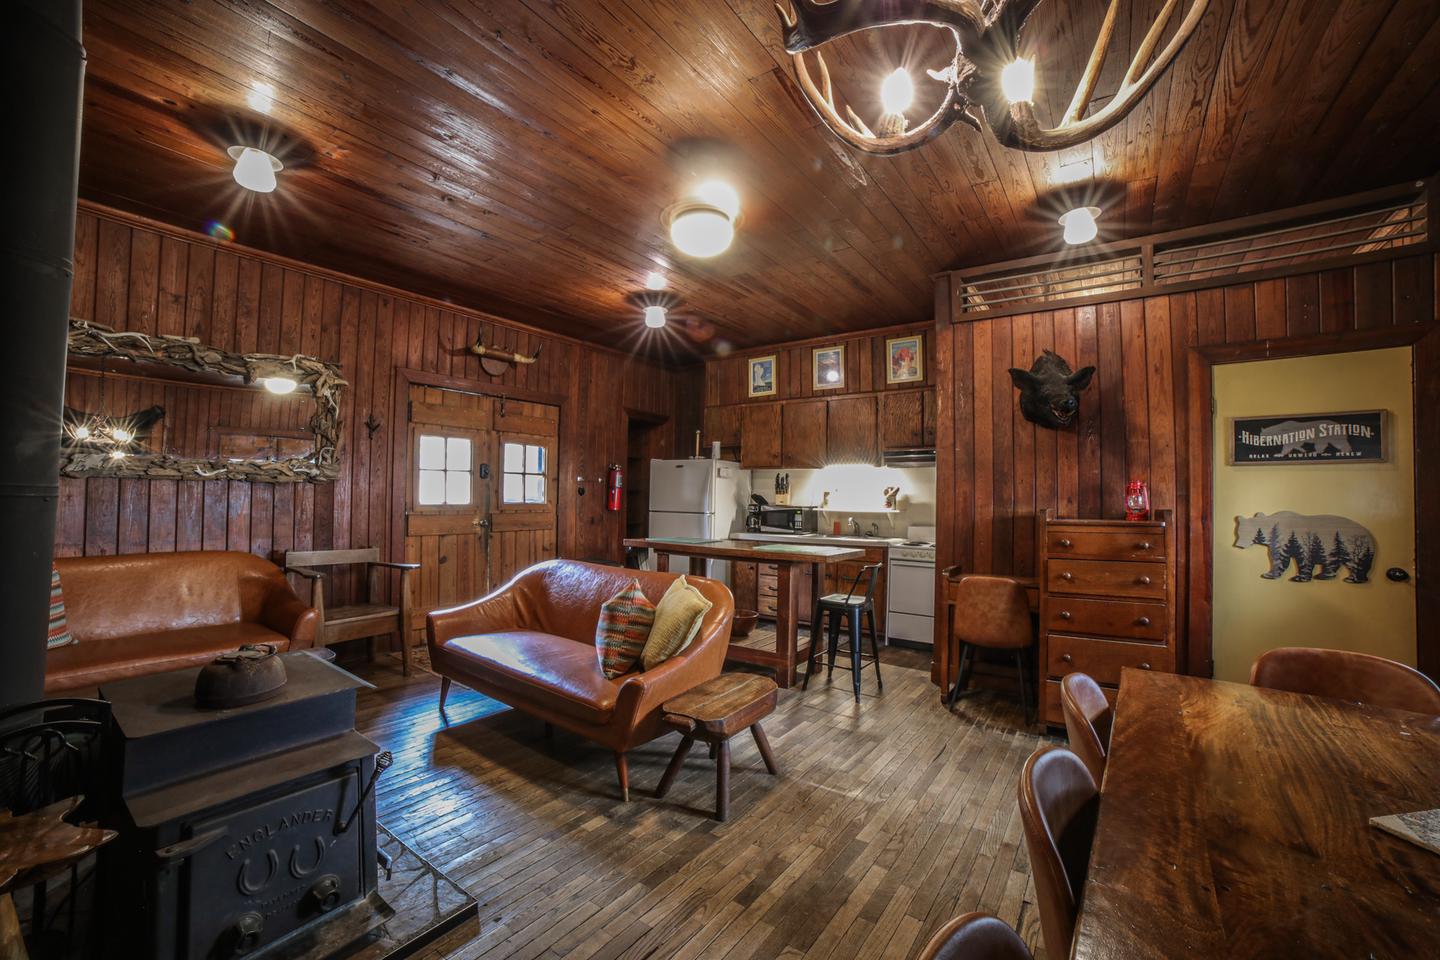 White Rock Mountain, Lodge kitchen.The open concept Lodge kitchen features new appliances, including an electric stove, refrigerator, microwave, toaster, coffee pot, crock pot, cooking utensils, pots & pans, vintage dishes, and much more!